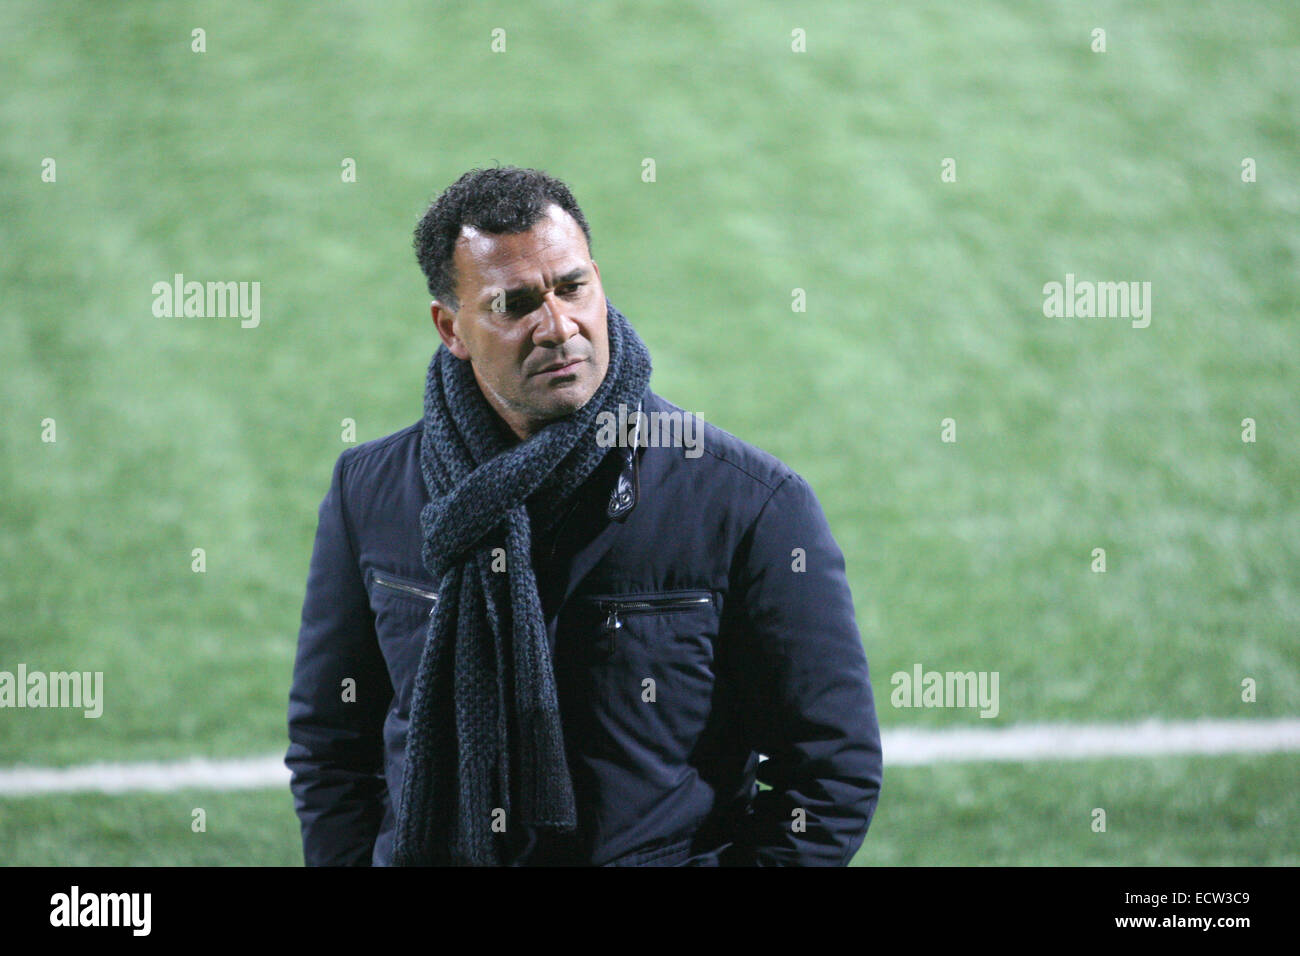 Dutch trainer Ruud Gullit during a match with FC Zenit from St Petersburg at the Terek football stadium in the Chechen capital Grozny, Russia Stock Photo